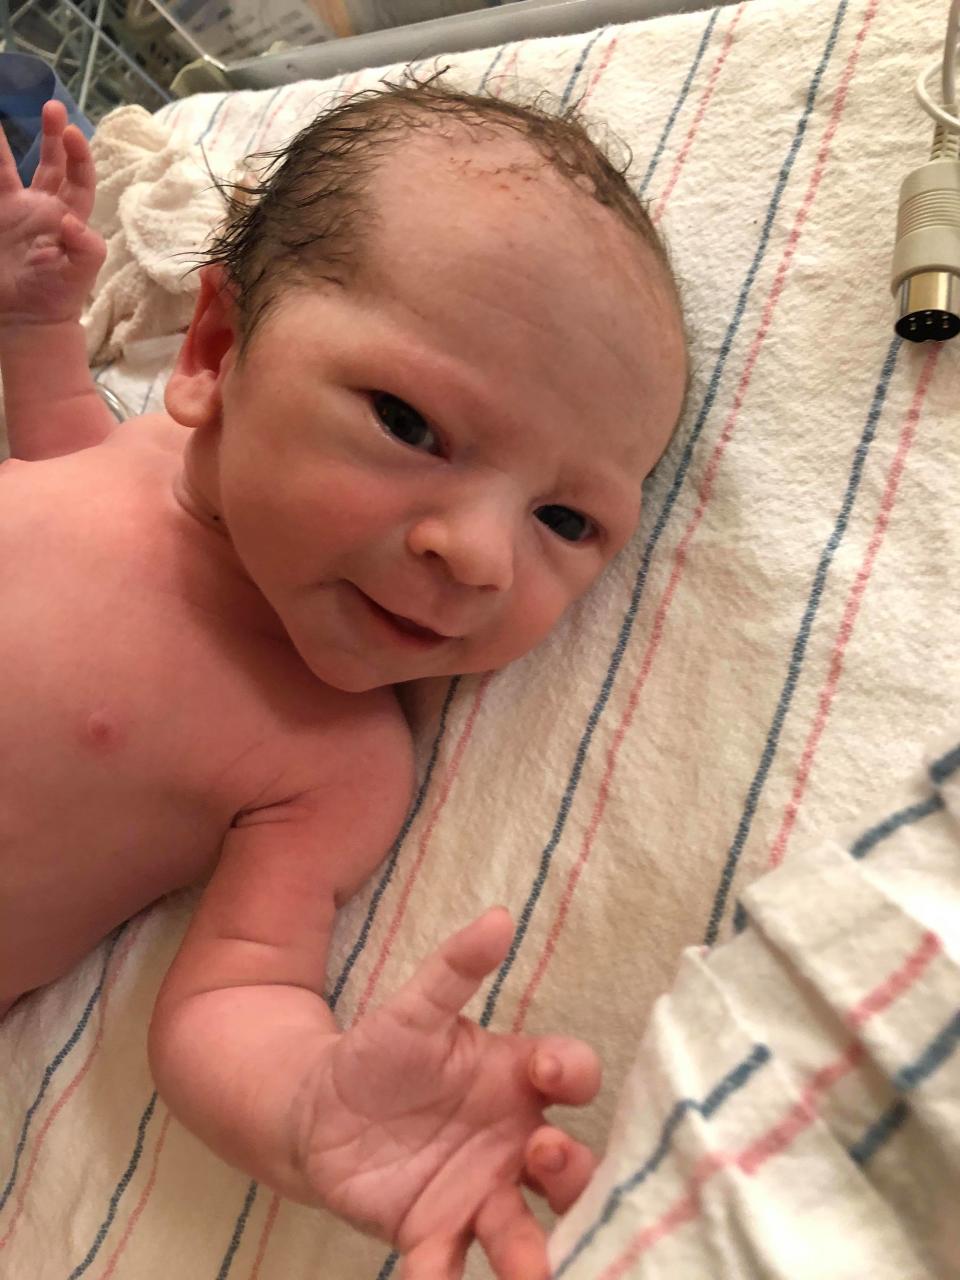 Baby Liam came as a big surprise on March 8 when his mother, who was unaware she was pregnant, gave birth in a toilet at her home near Boston.